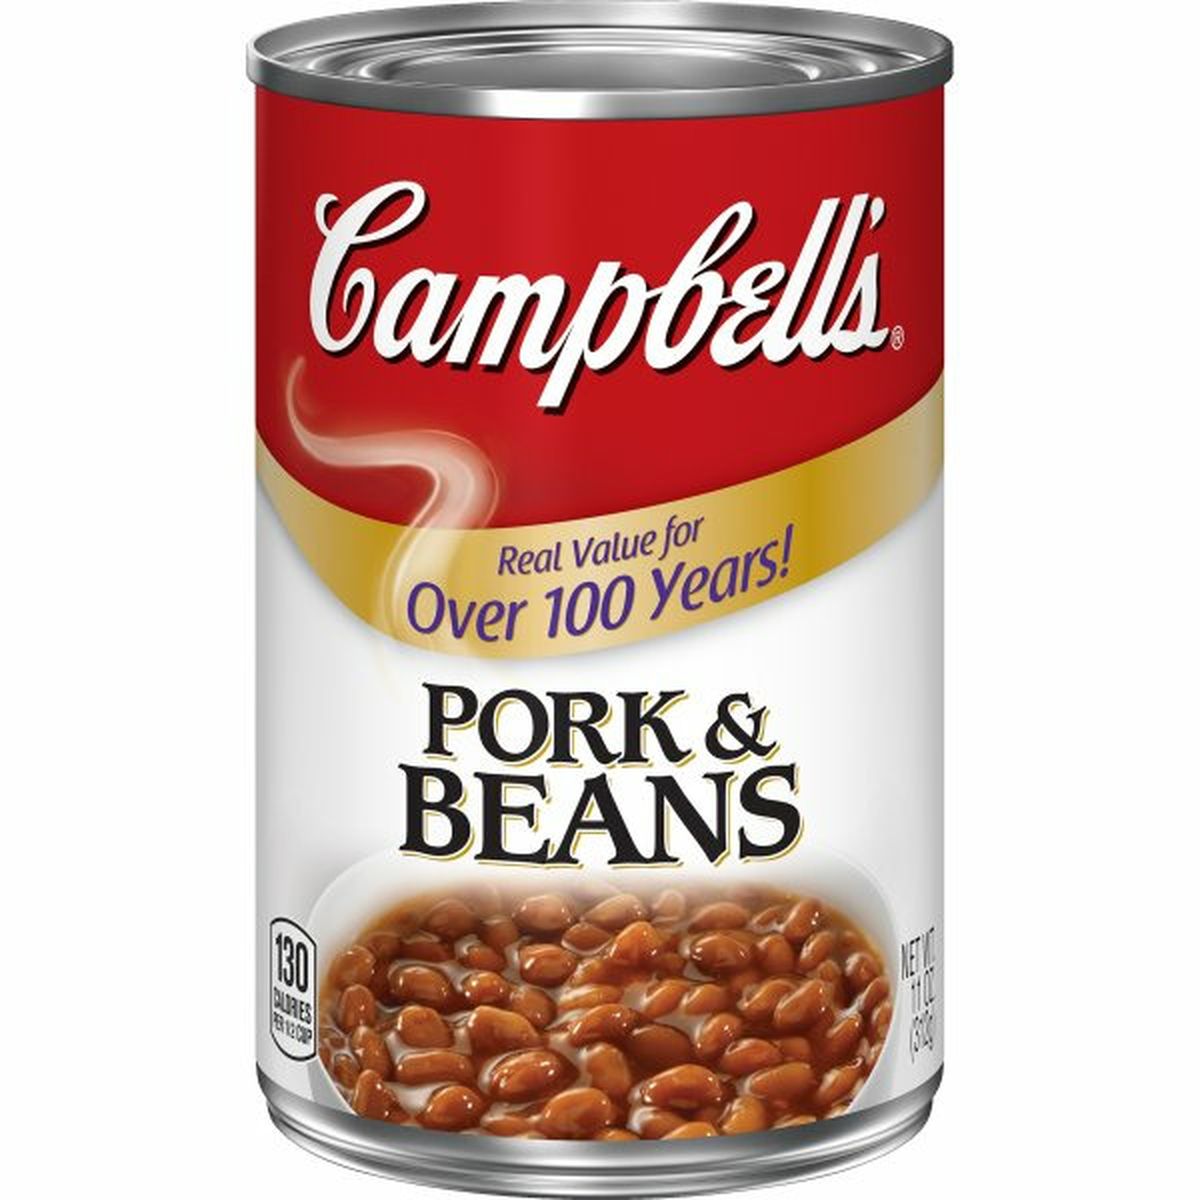 Calories in Campbell'ss Pork & Beans